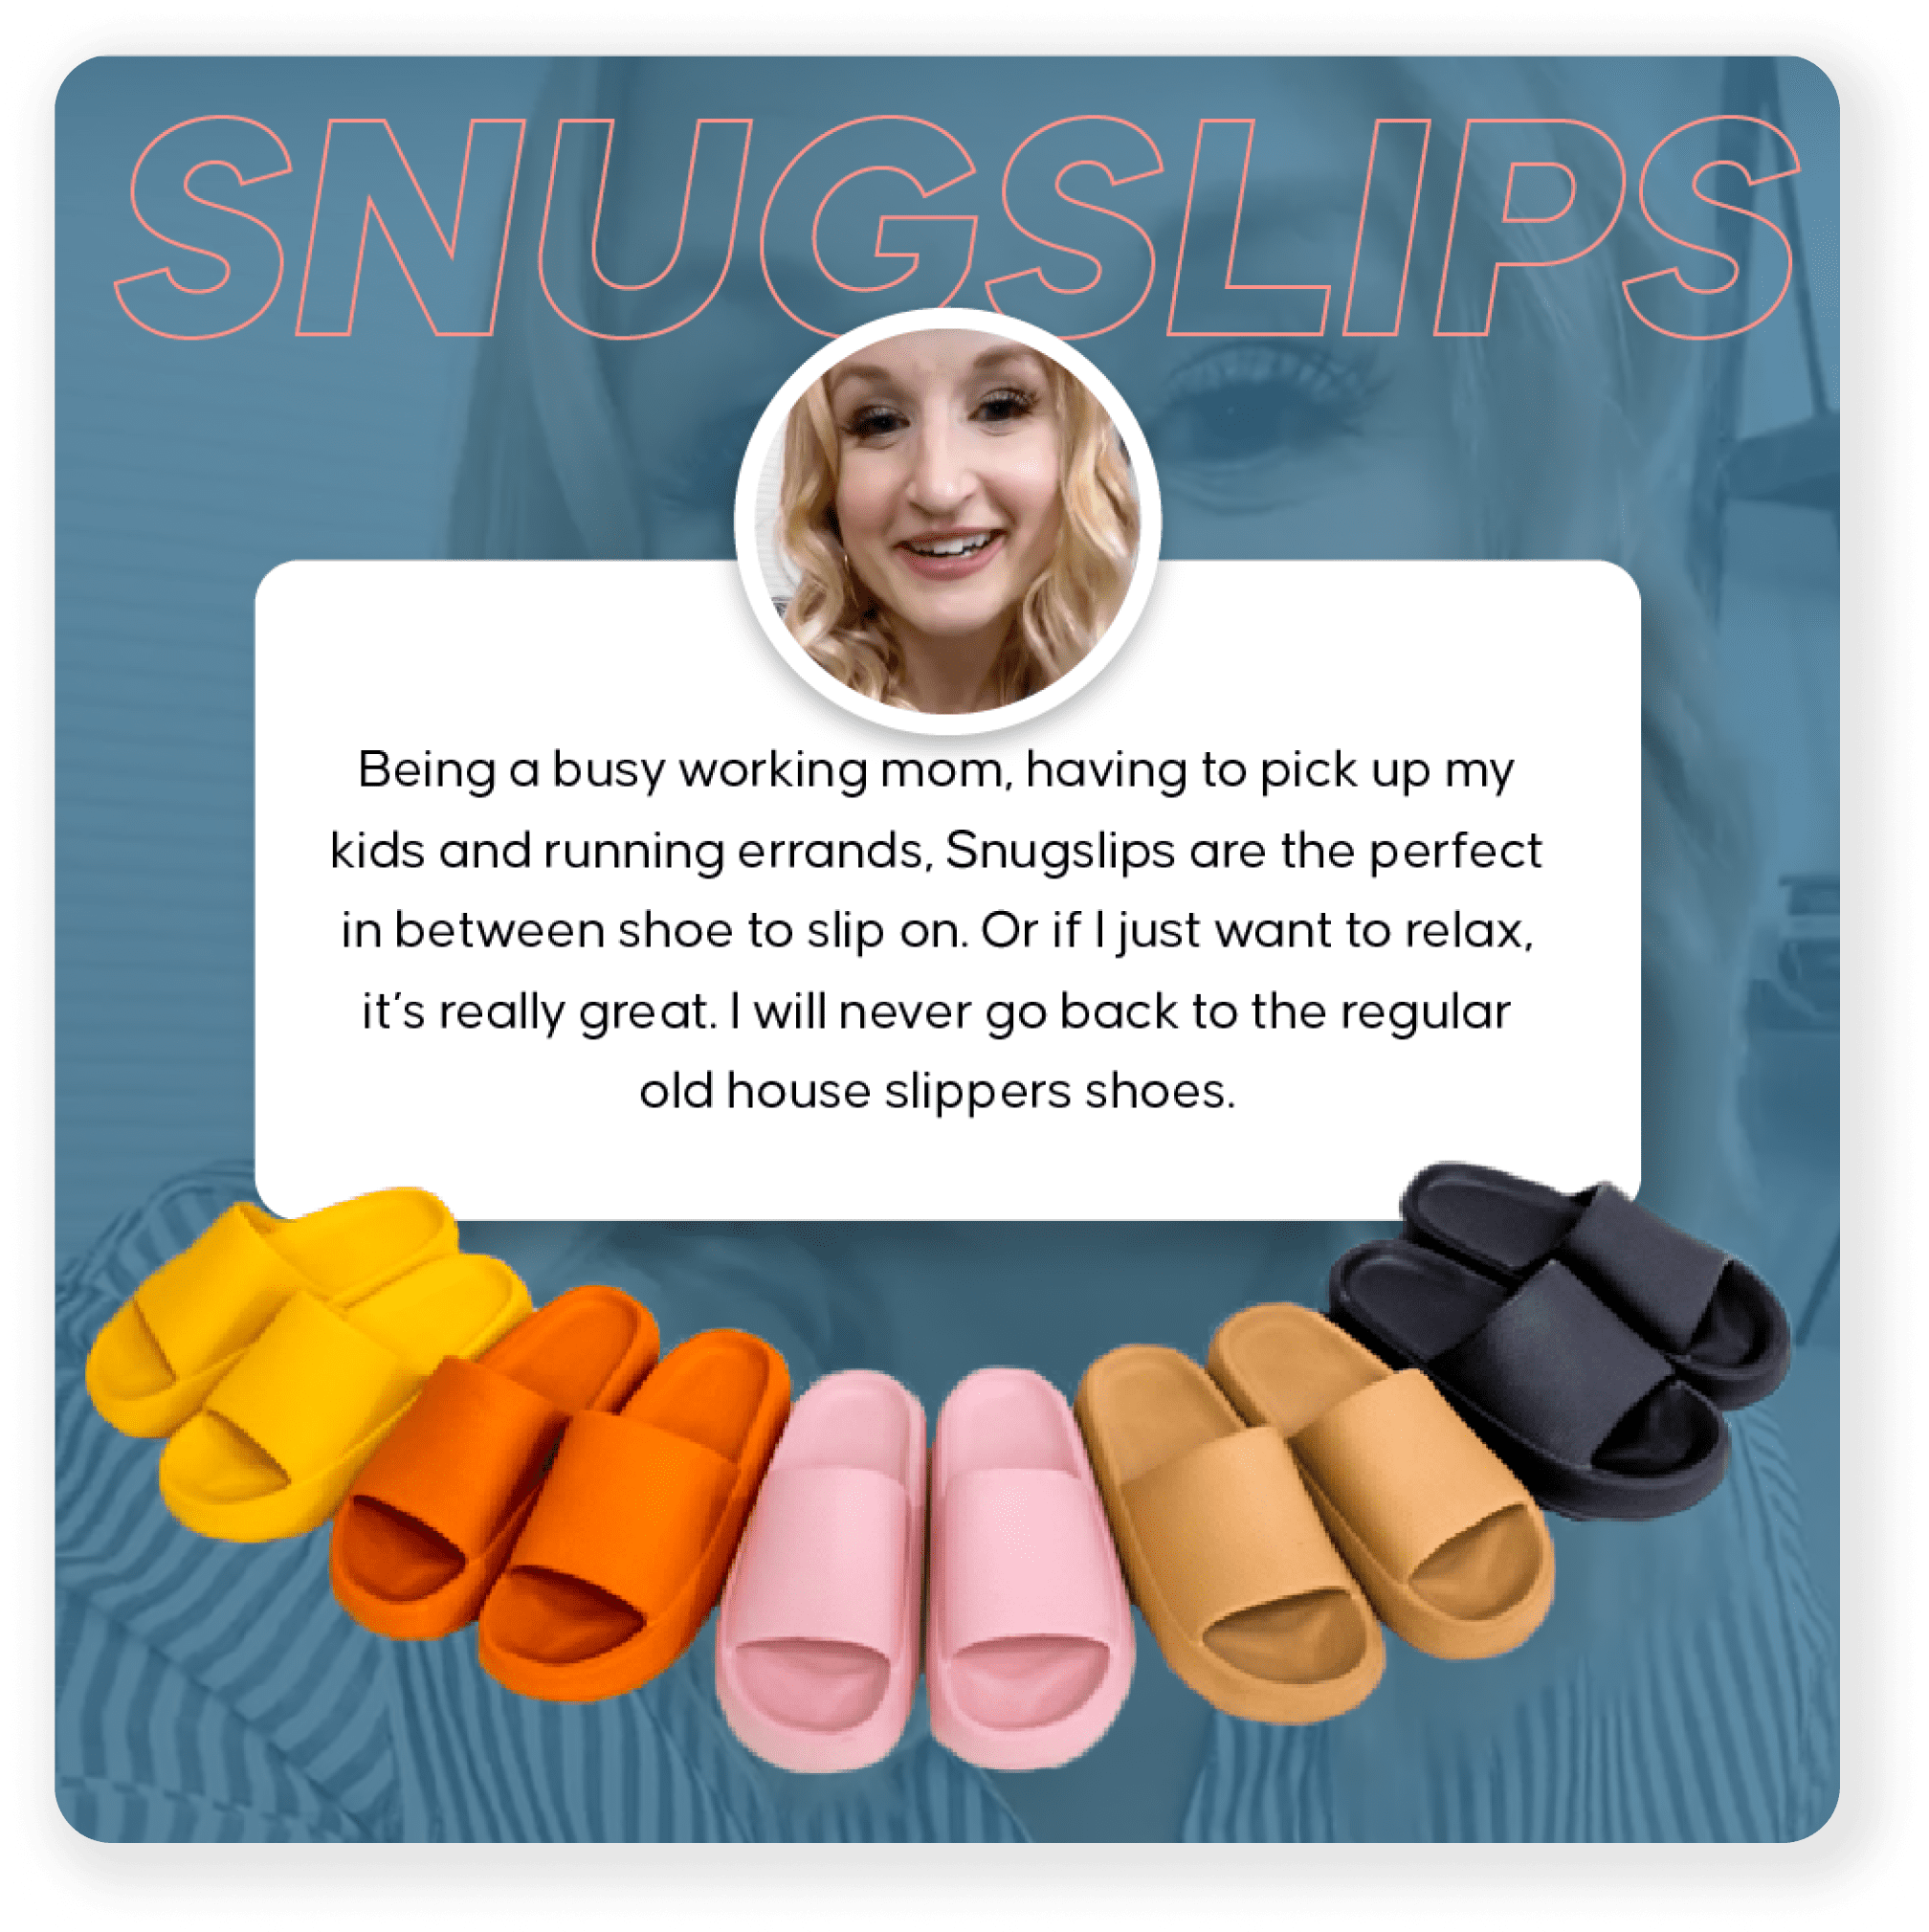 Slipper’s advertising featuring testimonial from a happy client. Showing five differents colors of slippers.